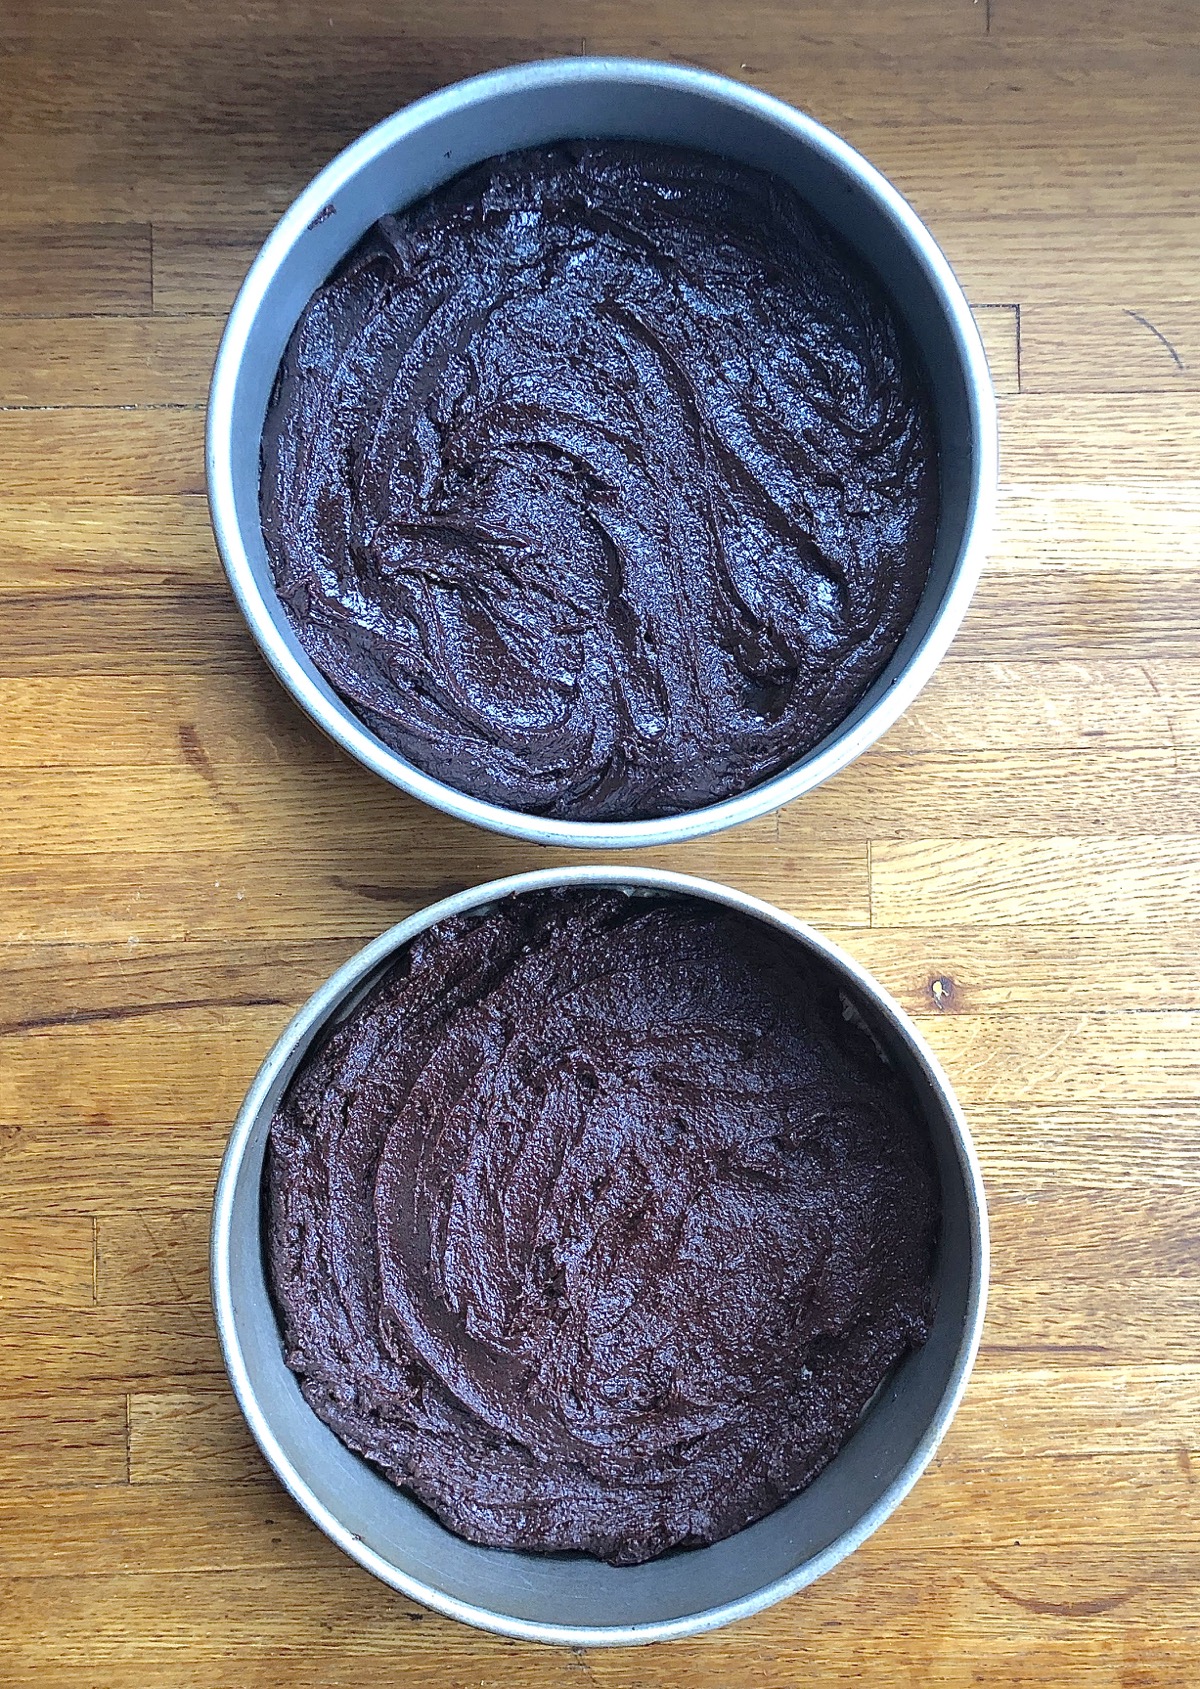 Two pans of brownie batter, one made with Truvia, one with granulated sugar